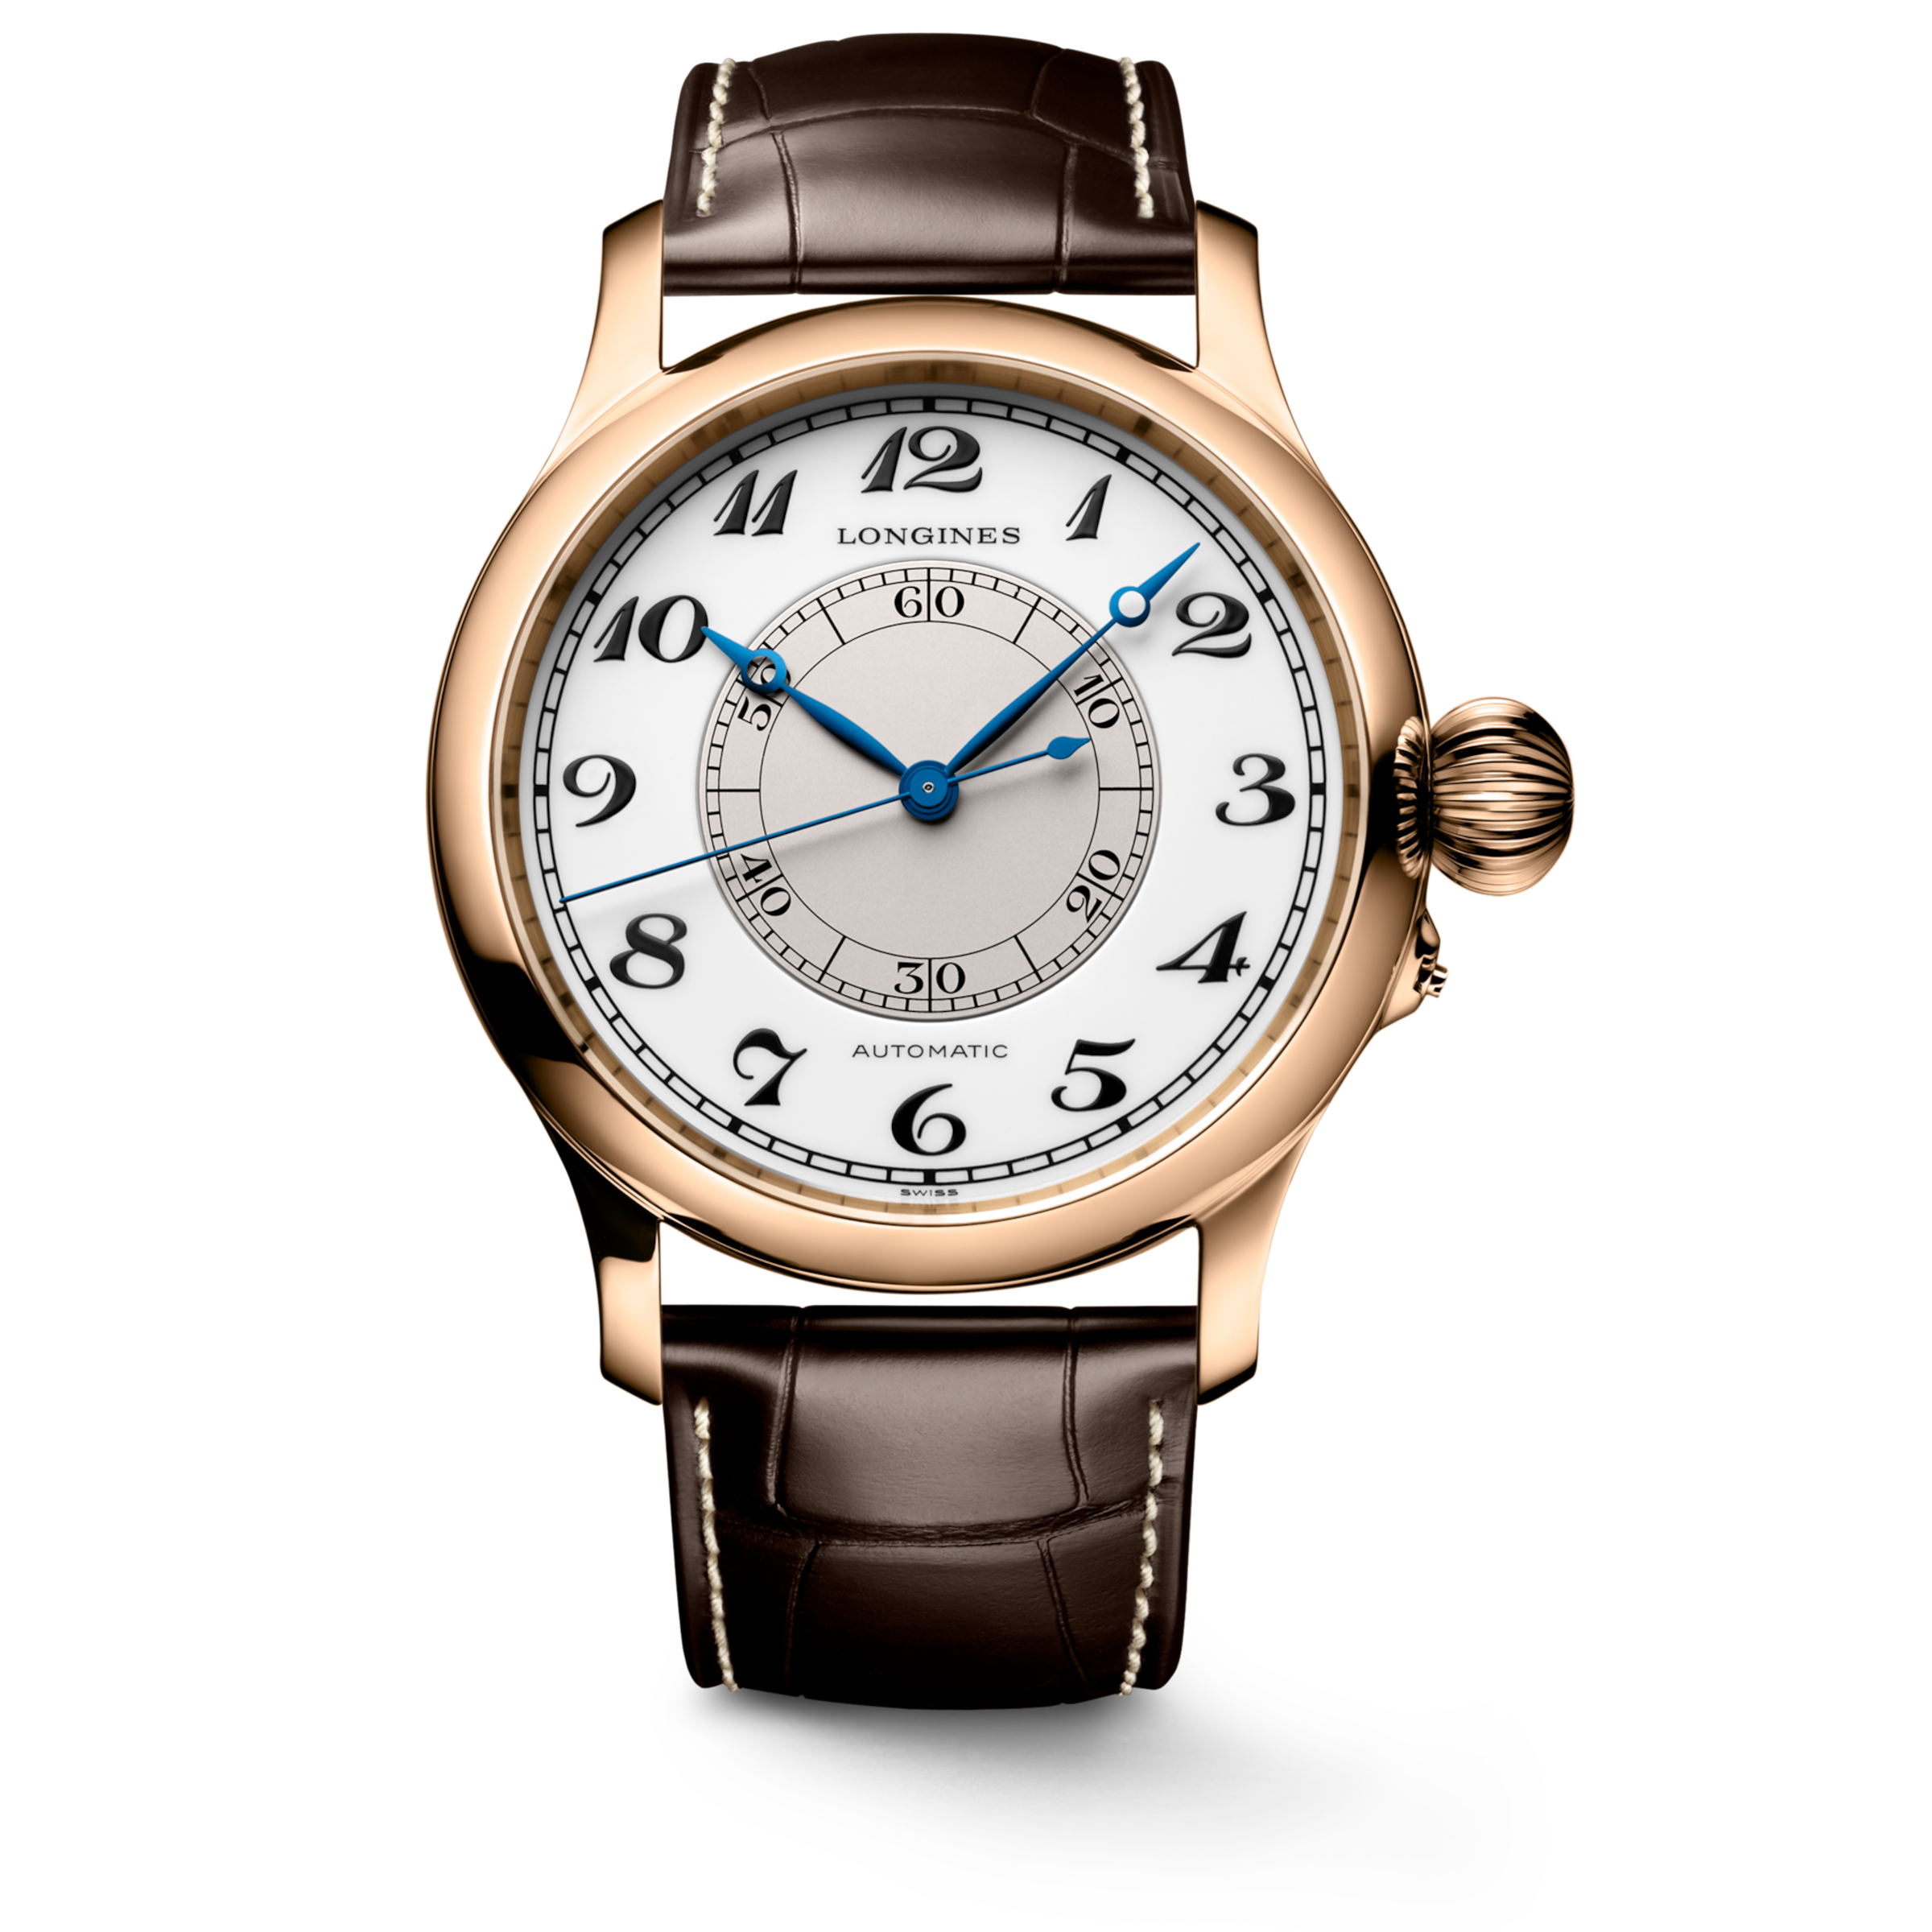 LONGINES WEEMS SECOND-SETTING WATCH